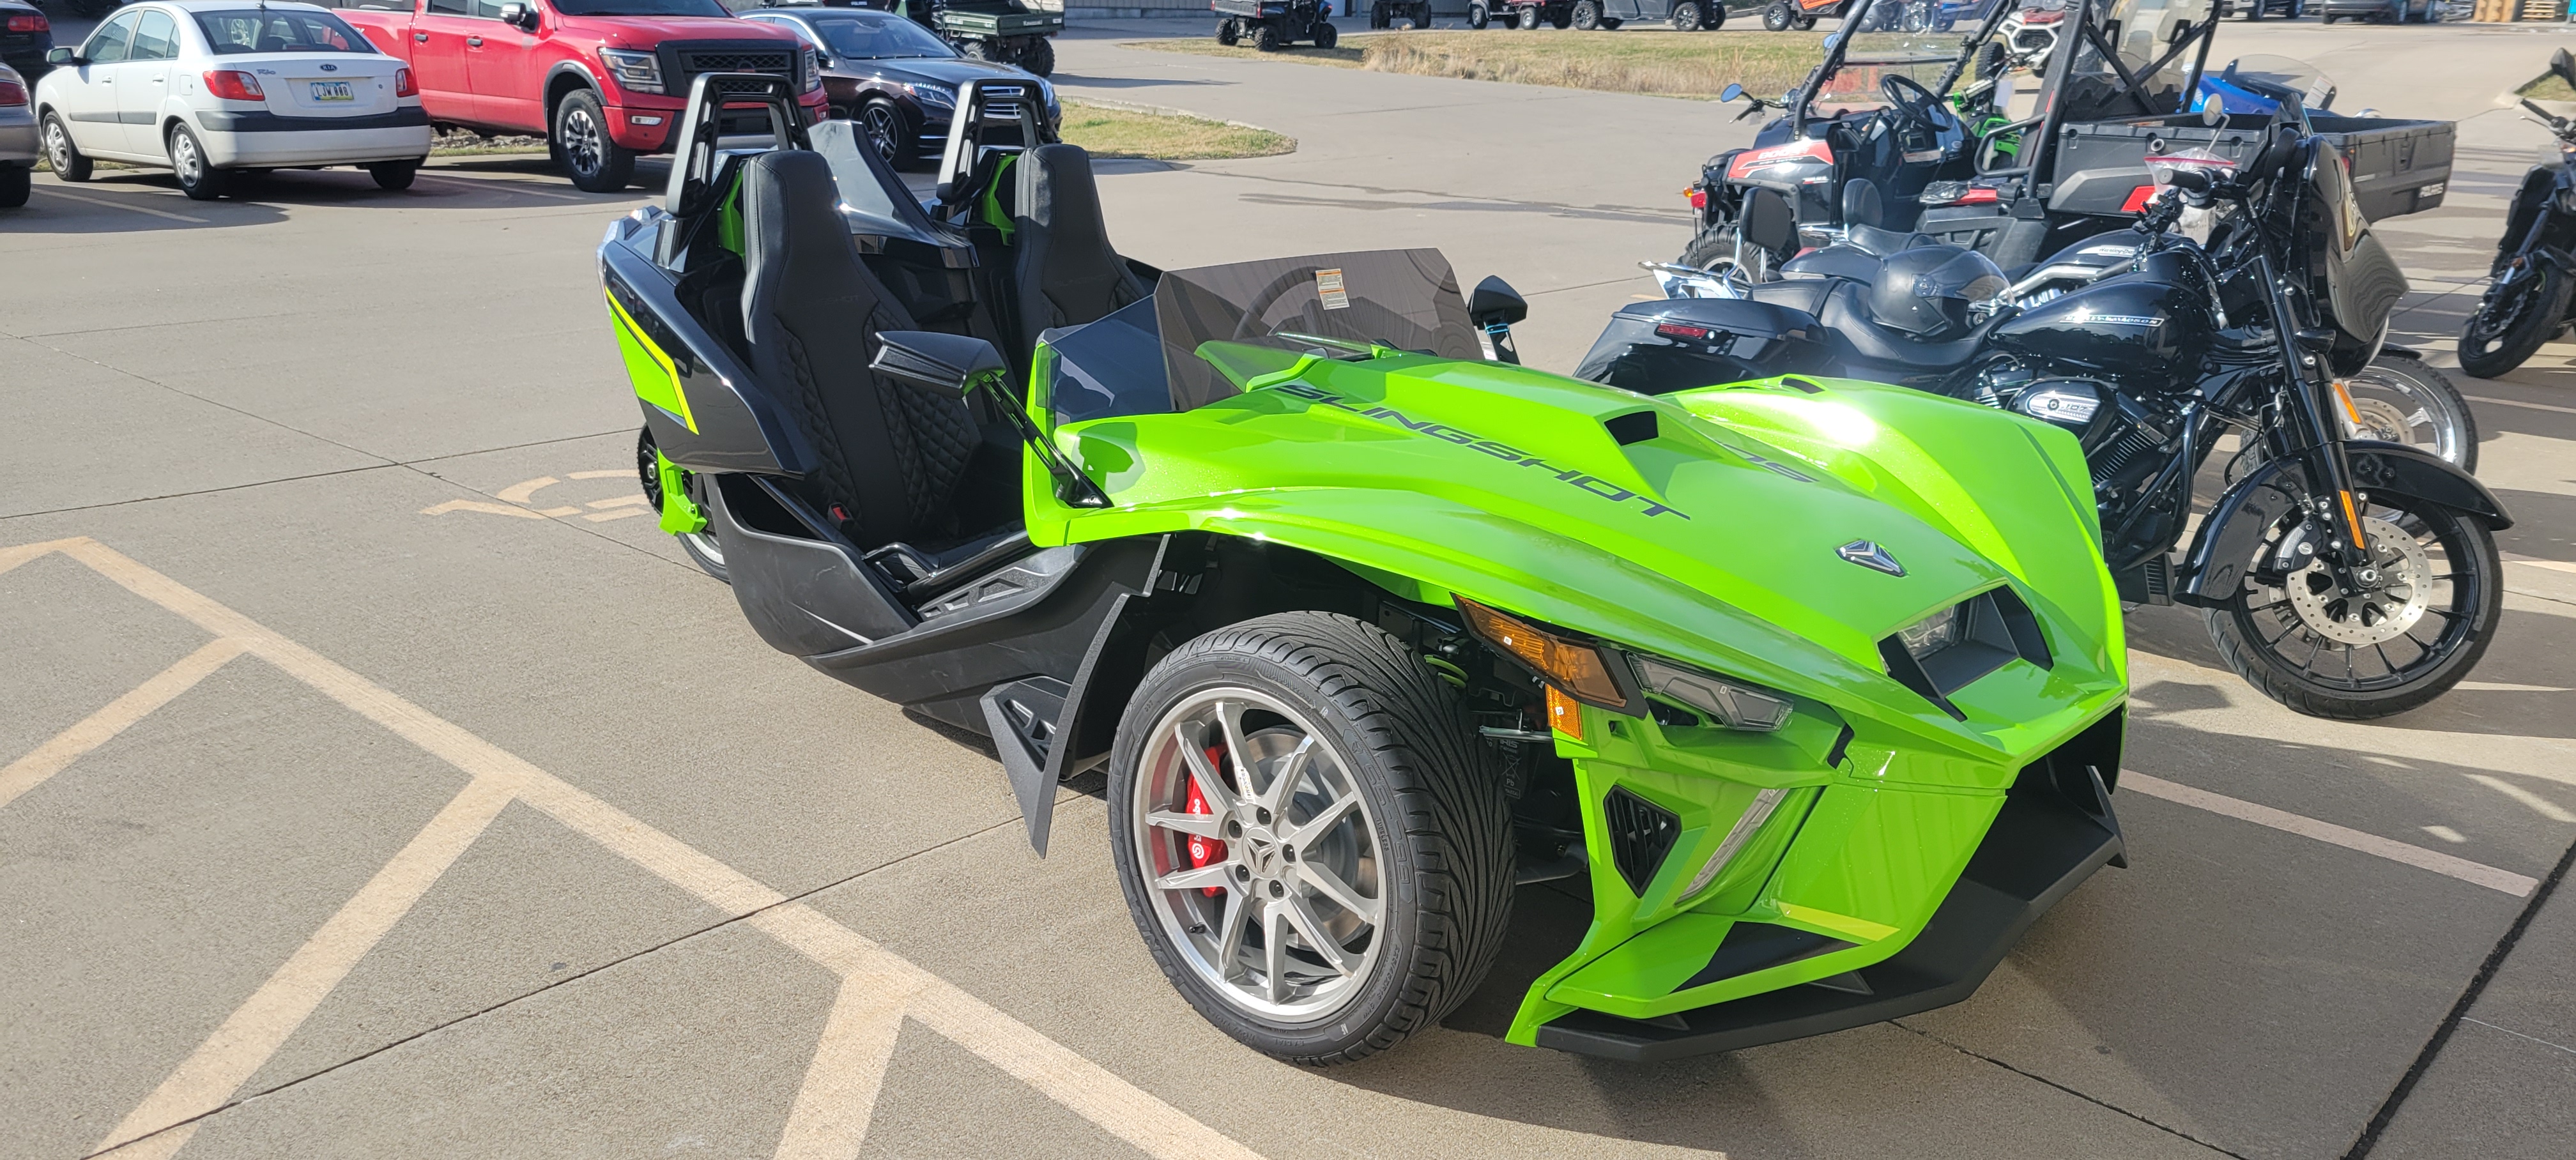 2022 Slingshot Slingshot R Auto - Design Center at Brenny's Motorcycle Clinic, Bettendorf, IA 52722